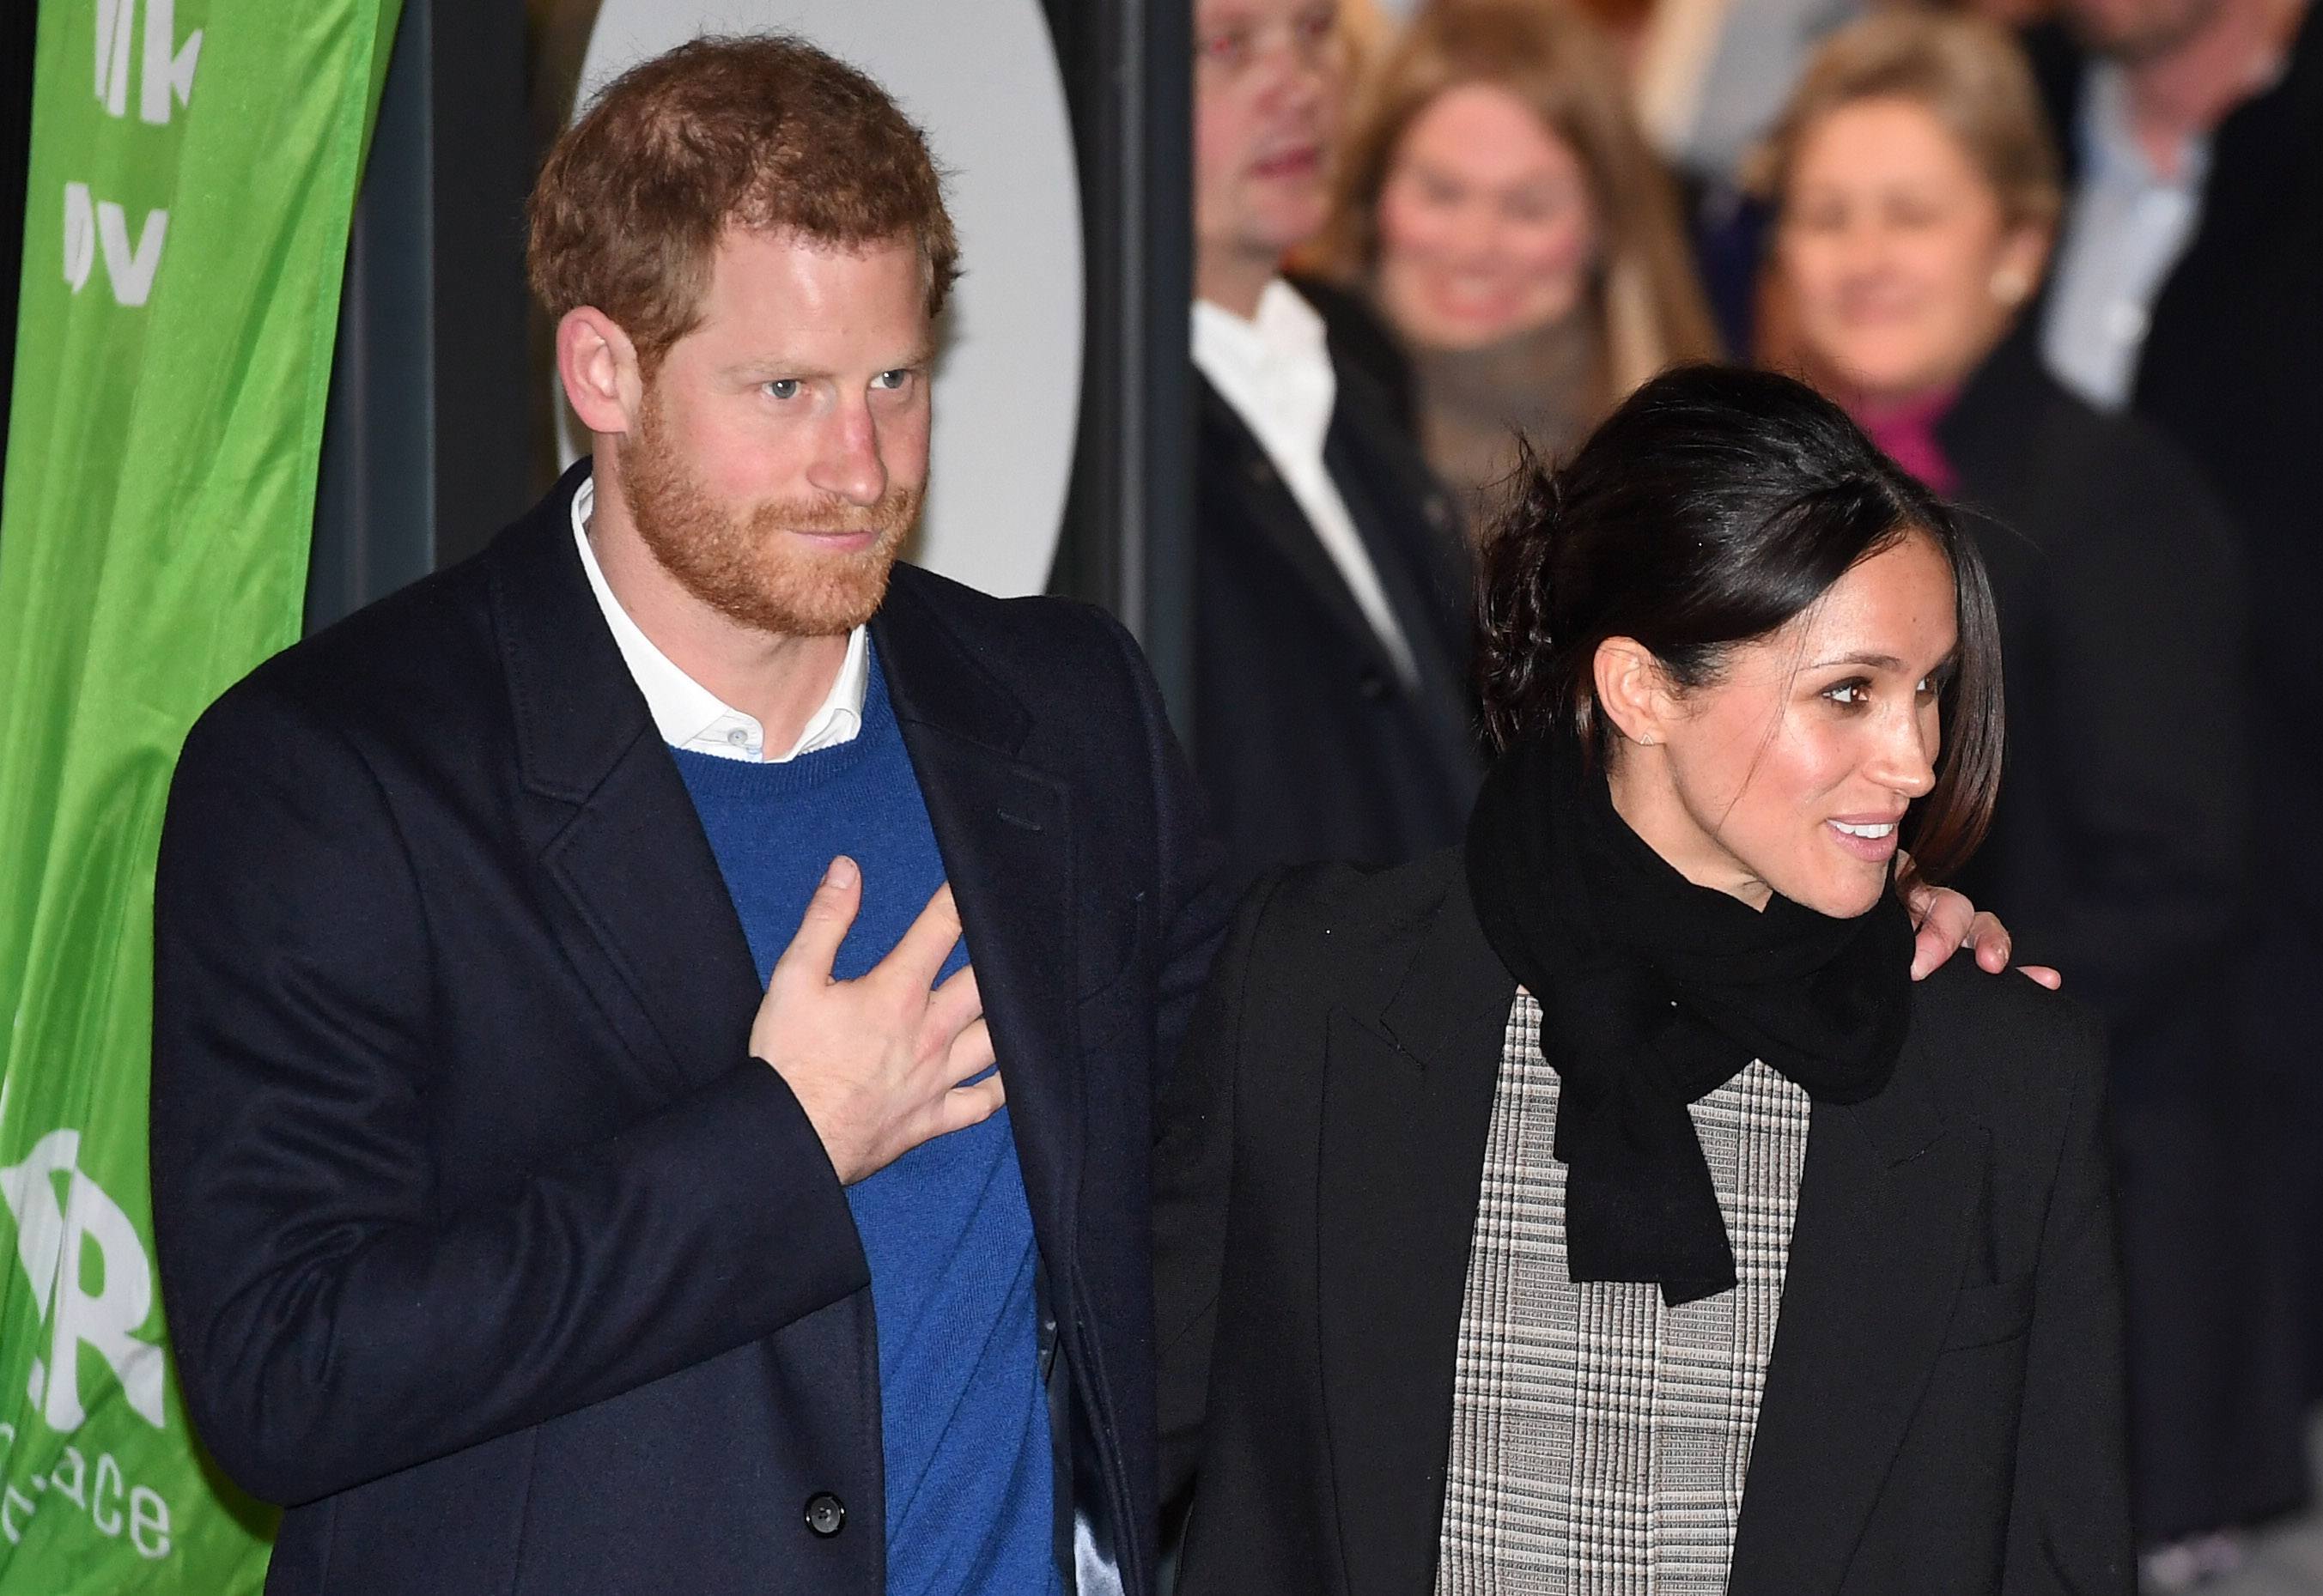 Prince Harry (L) and fiancee Meghan Markle leave after their visit to Star Hub